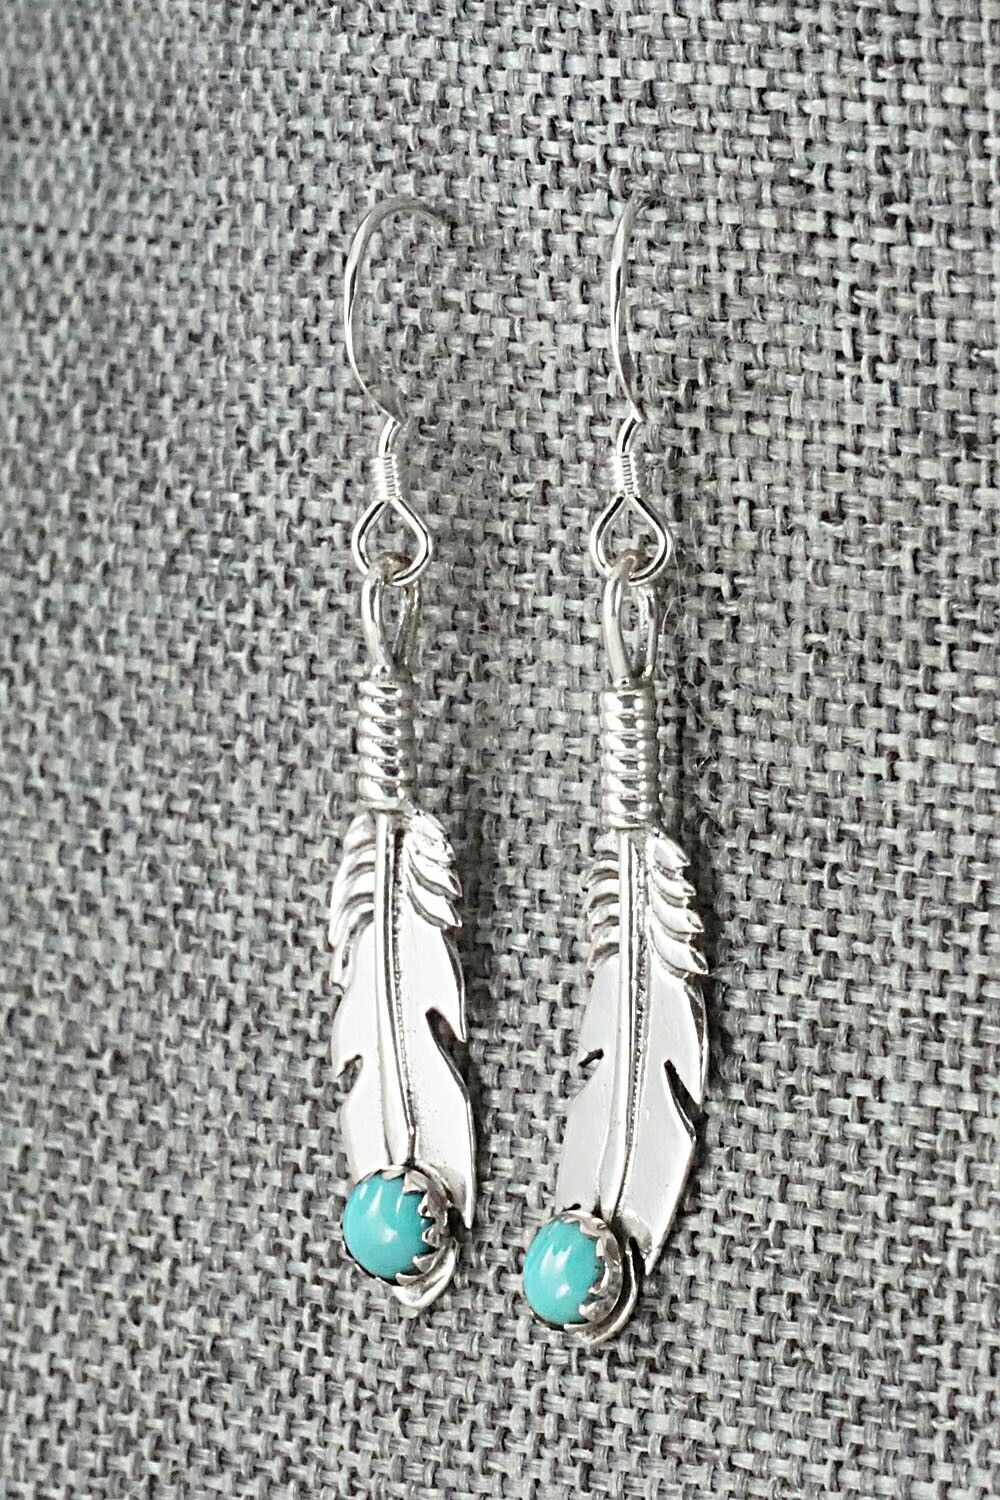 Turquoise and Sterling Silver Earrings - Louise Joe